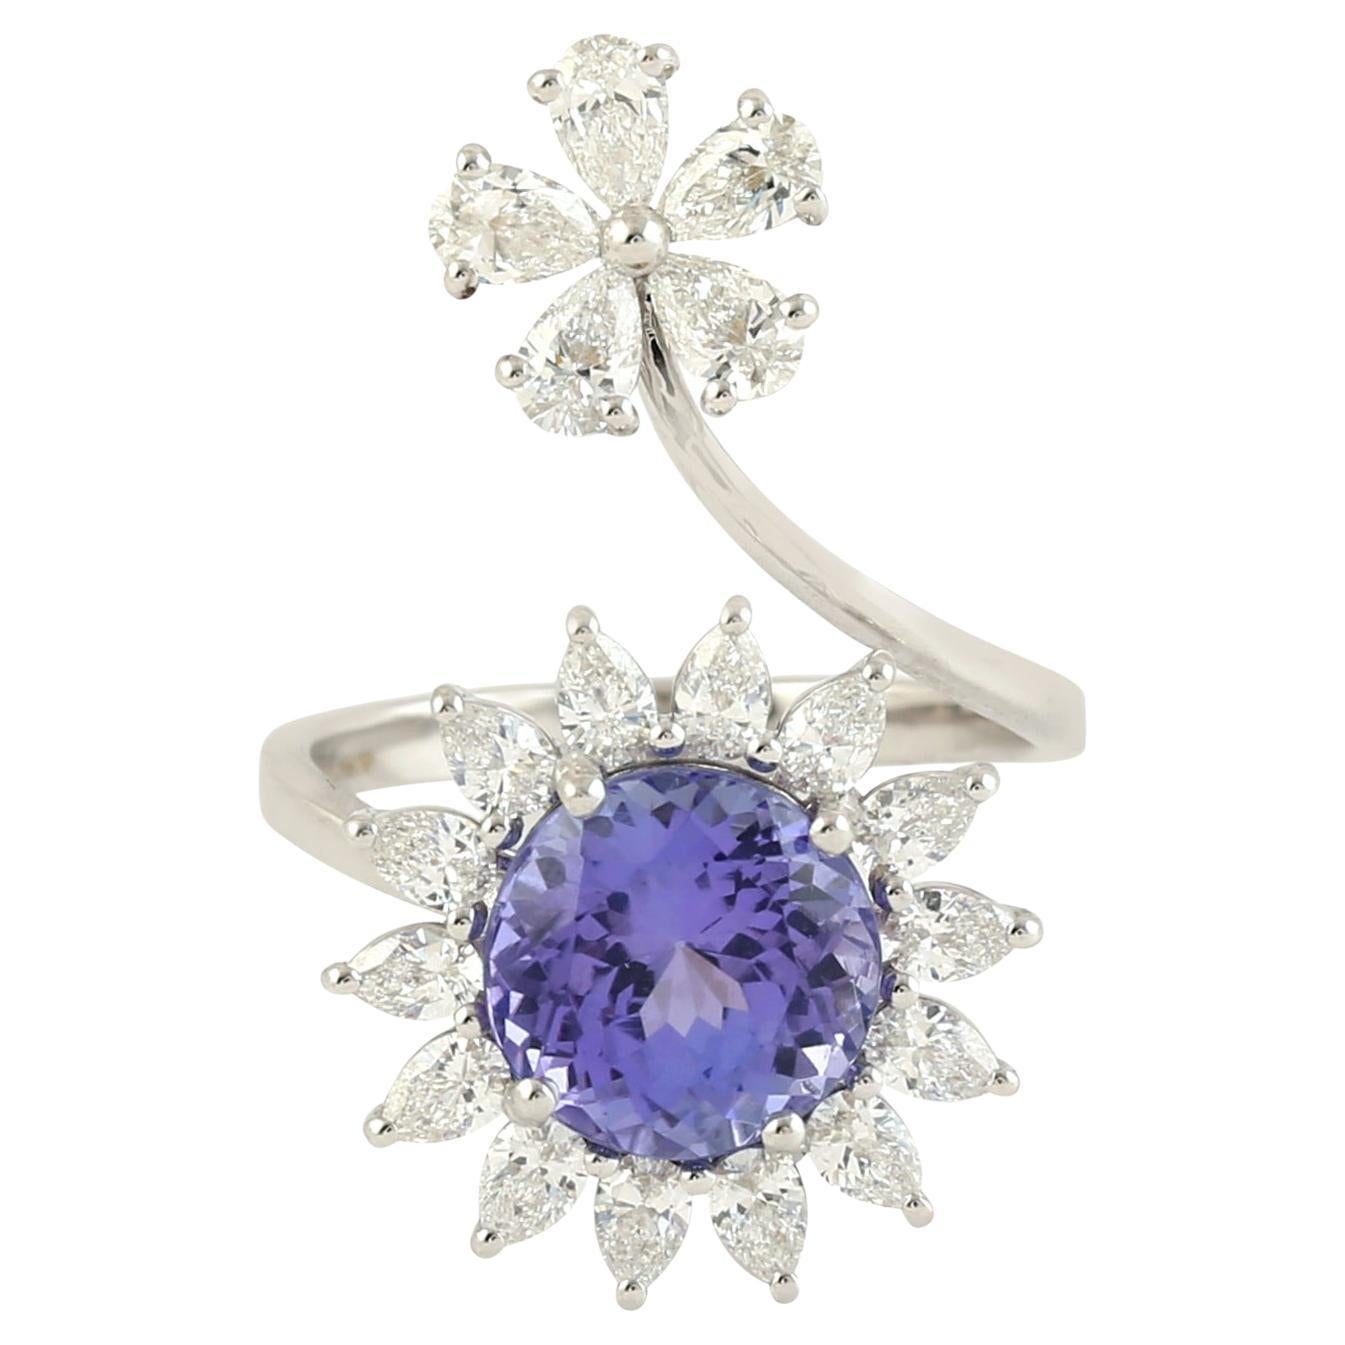 Sunflower Resembling Ring With Tanzanite & Diamonds Made In 18k White Gold